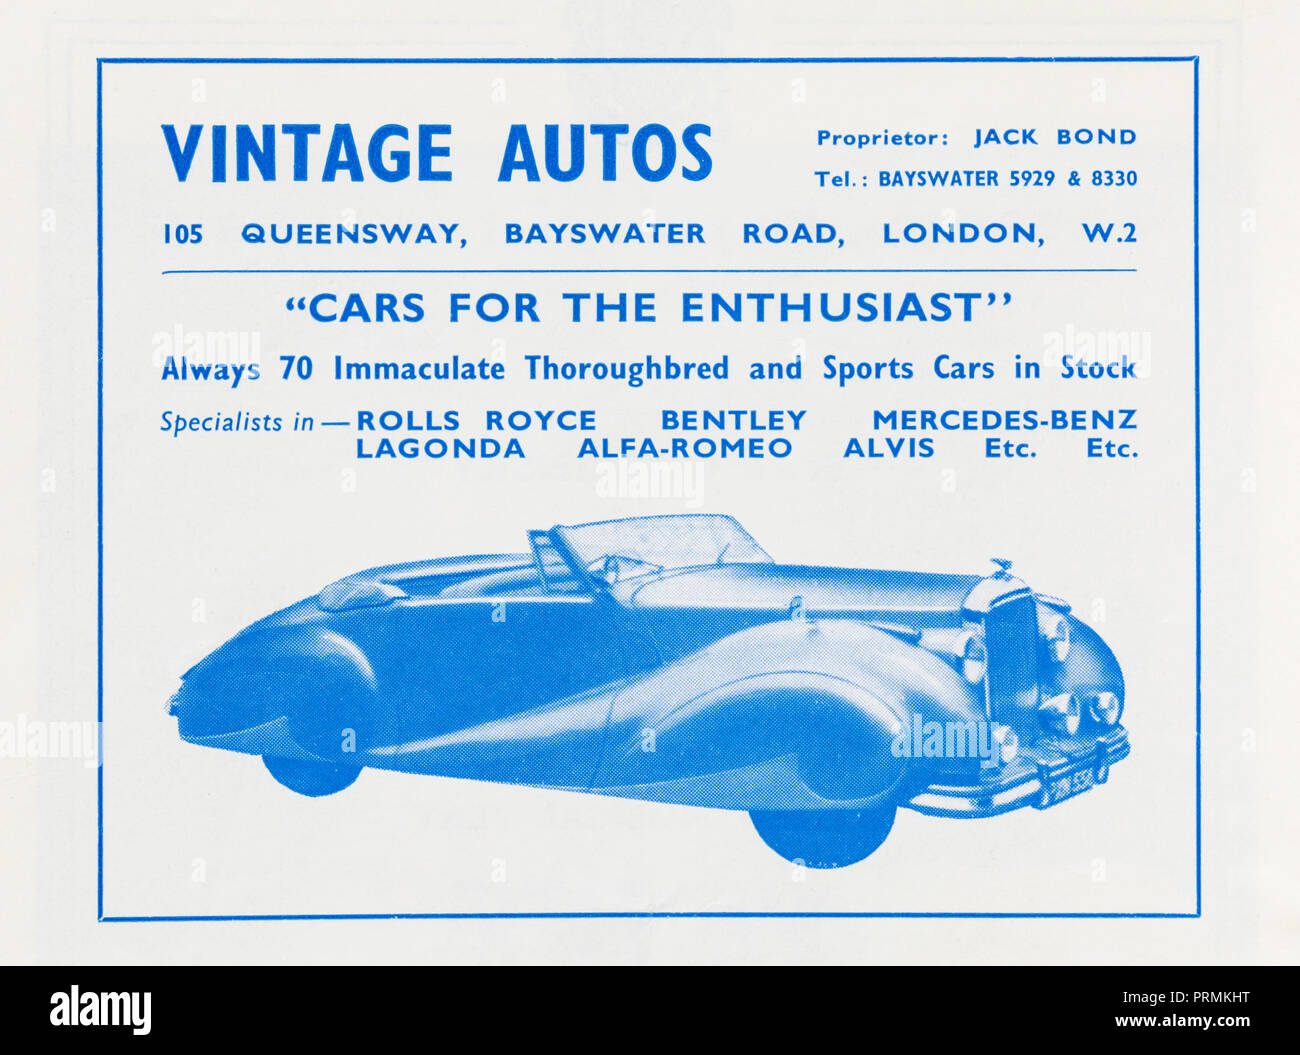 1956 advertisement for Vintage Autos car dealers in Queensway, London. Stock Photo